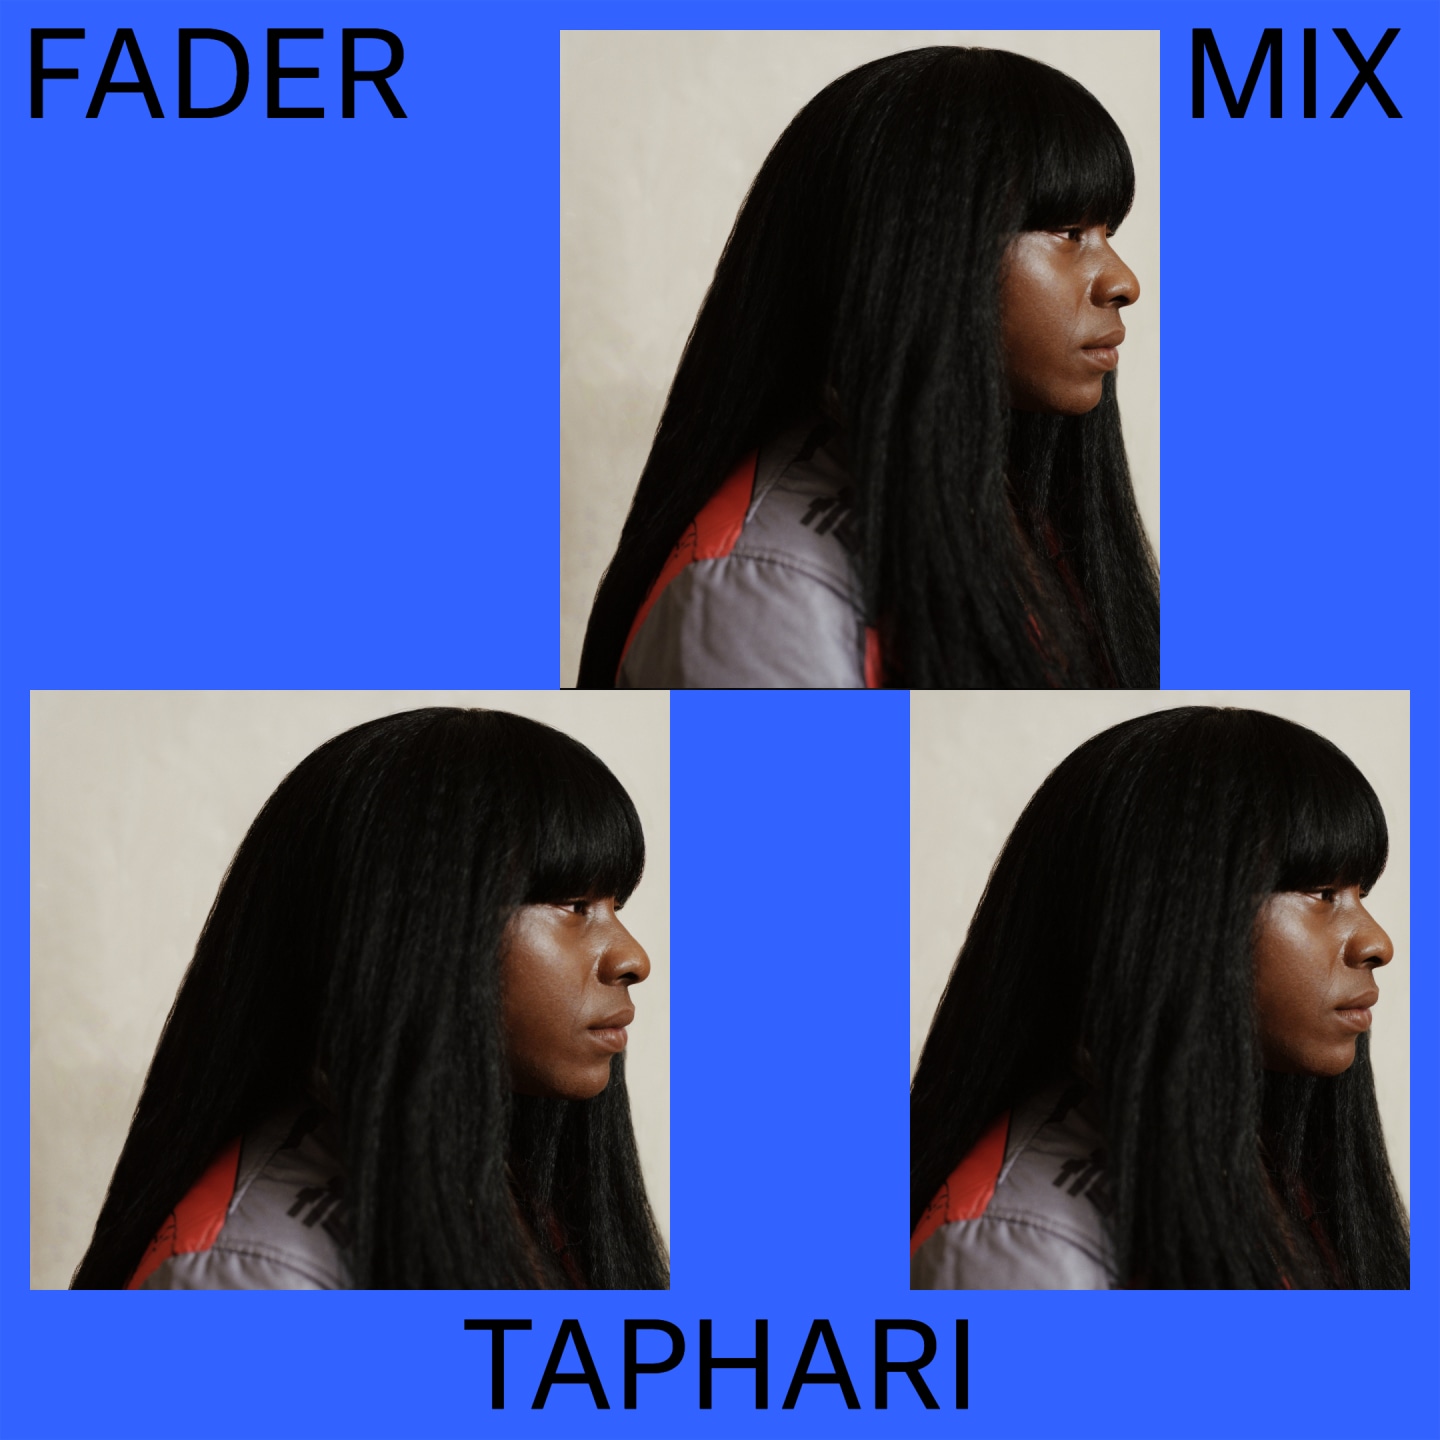 Listen to a new FADER Mix by Taphari